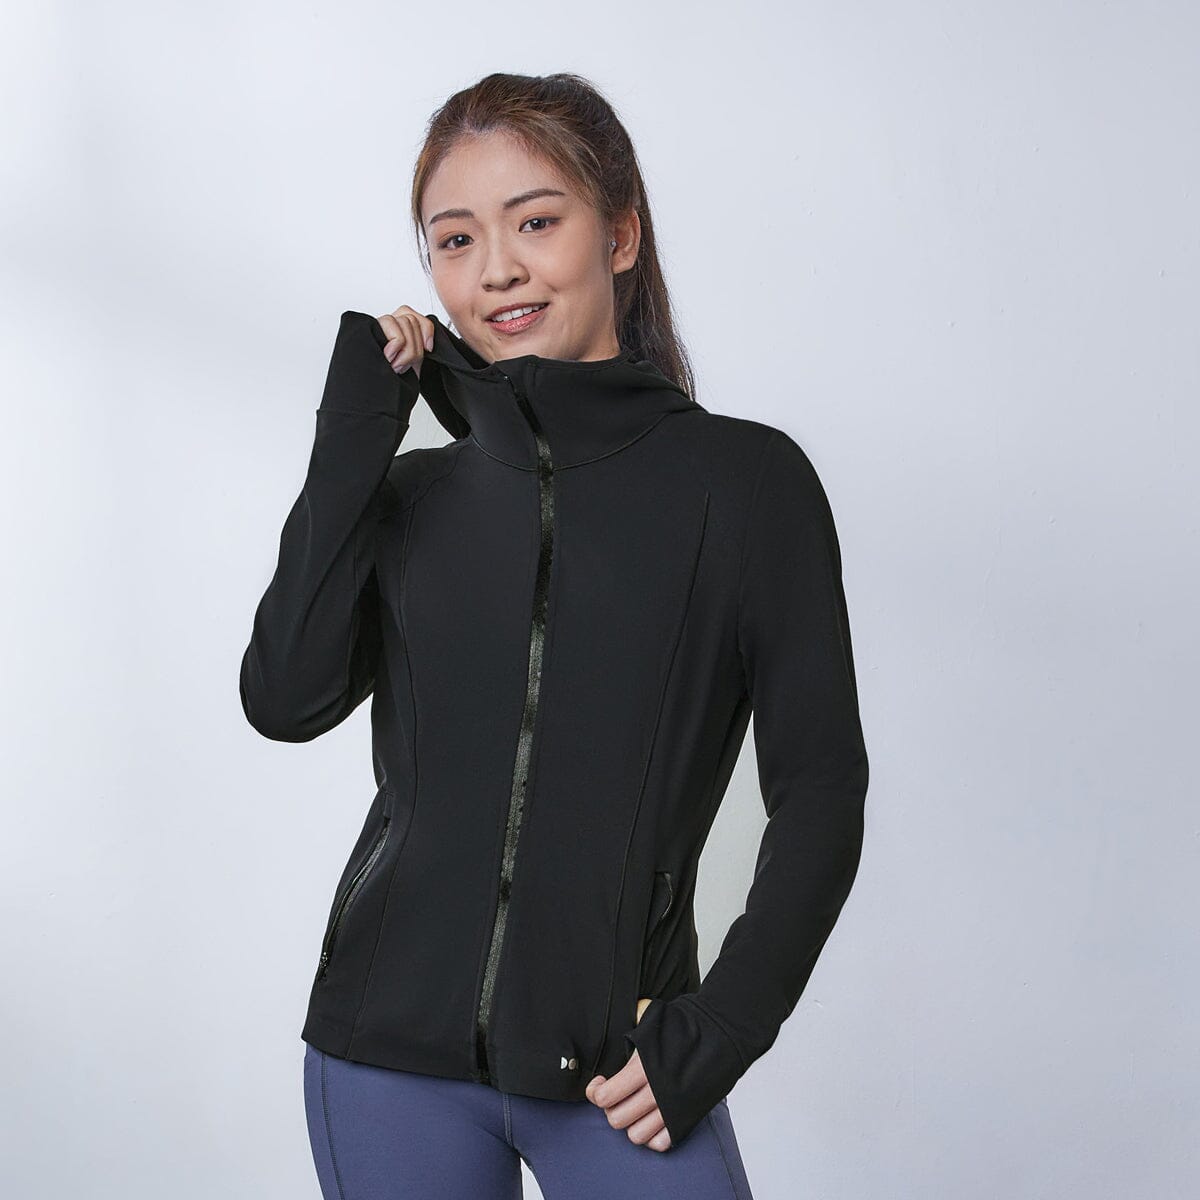 Effortless UV Protection Slim Fit Jacket Tops Her own words SPORTS 